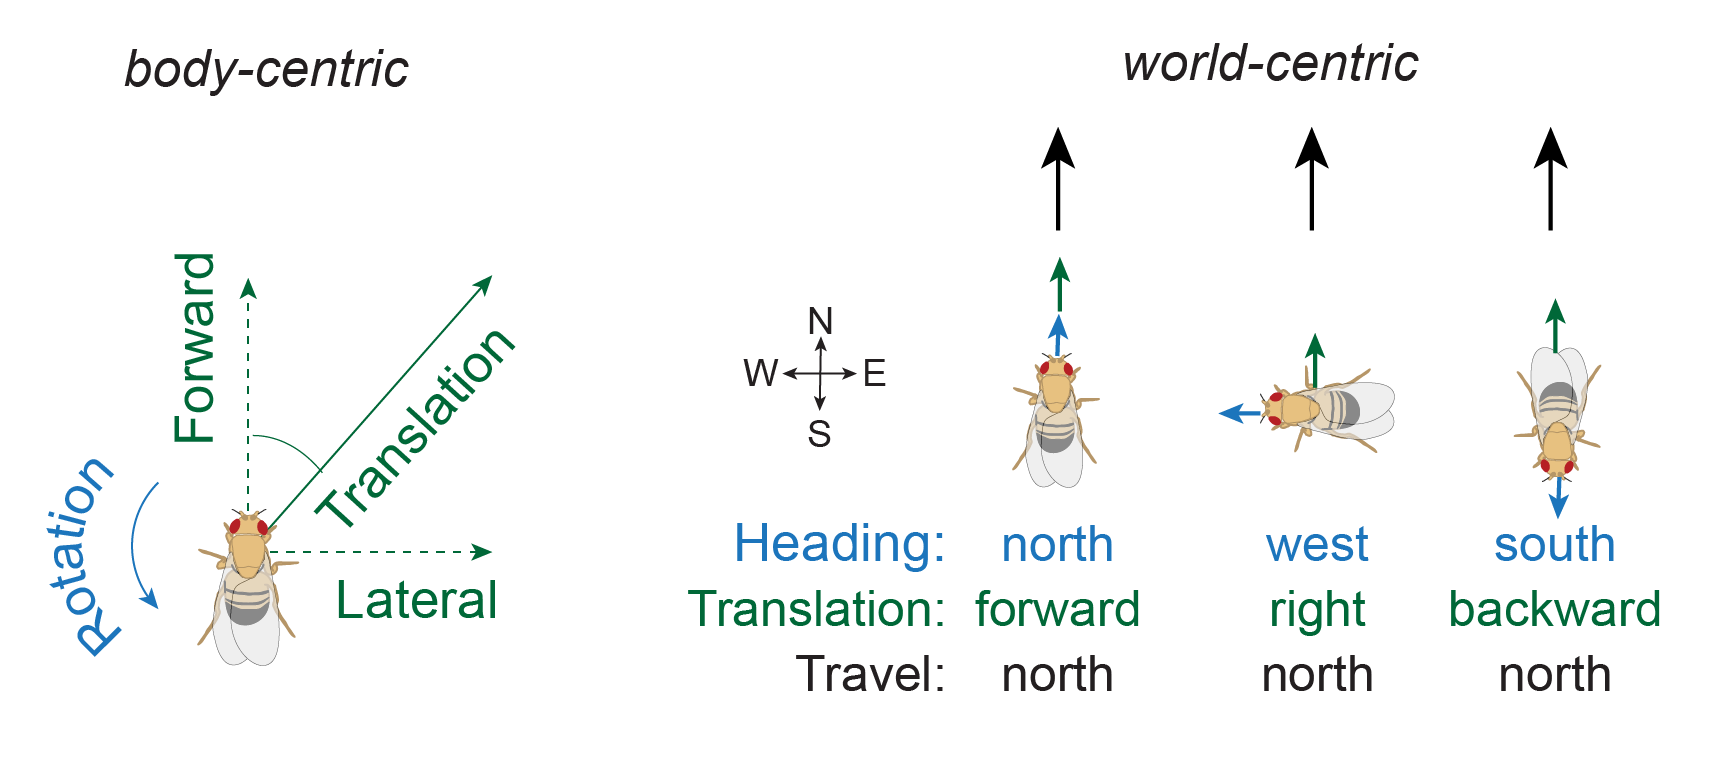 Schematic showing movement directions in body-centric versus world-centric space. On the left, in body-centric coordinates the walking fly can have rotational and translational velocity. On the right, each of the three example flies has a different heading direction and body-centric translational velocity direction, but all three have the same world-centric travel velocity direction